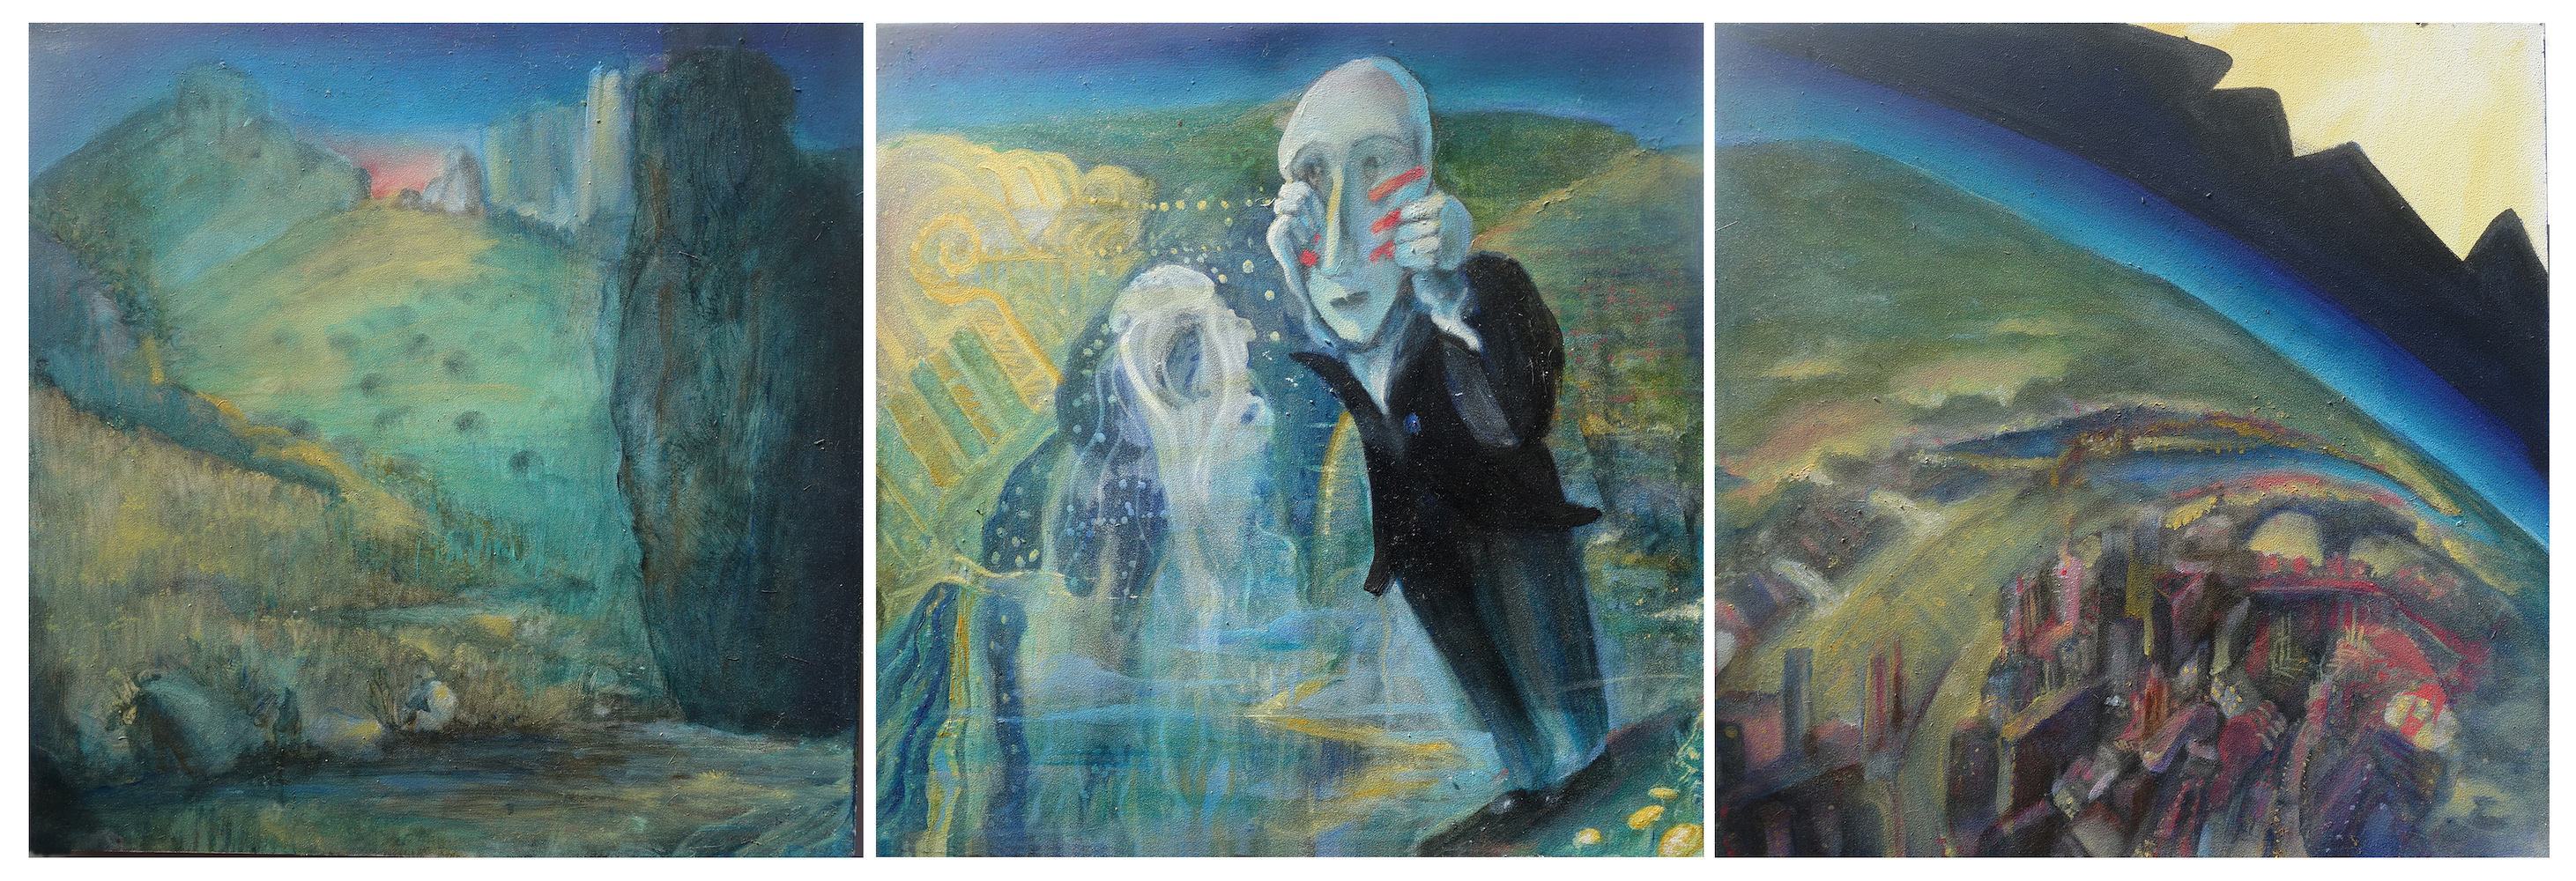 Curved horizon line with sun, man in a suit with a mask and figure rising from water